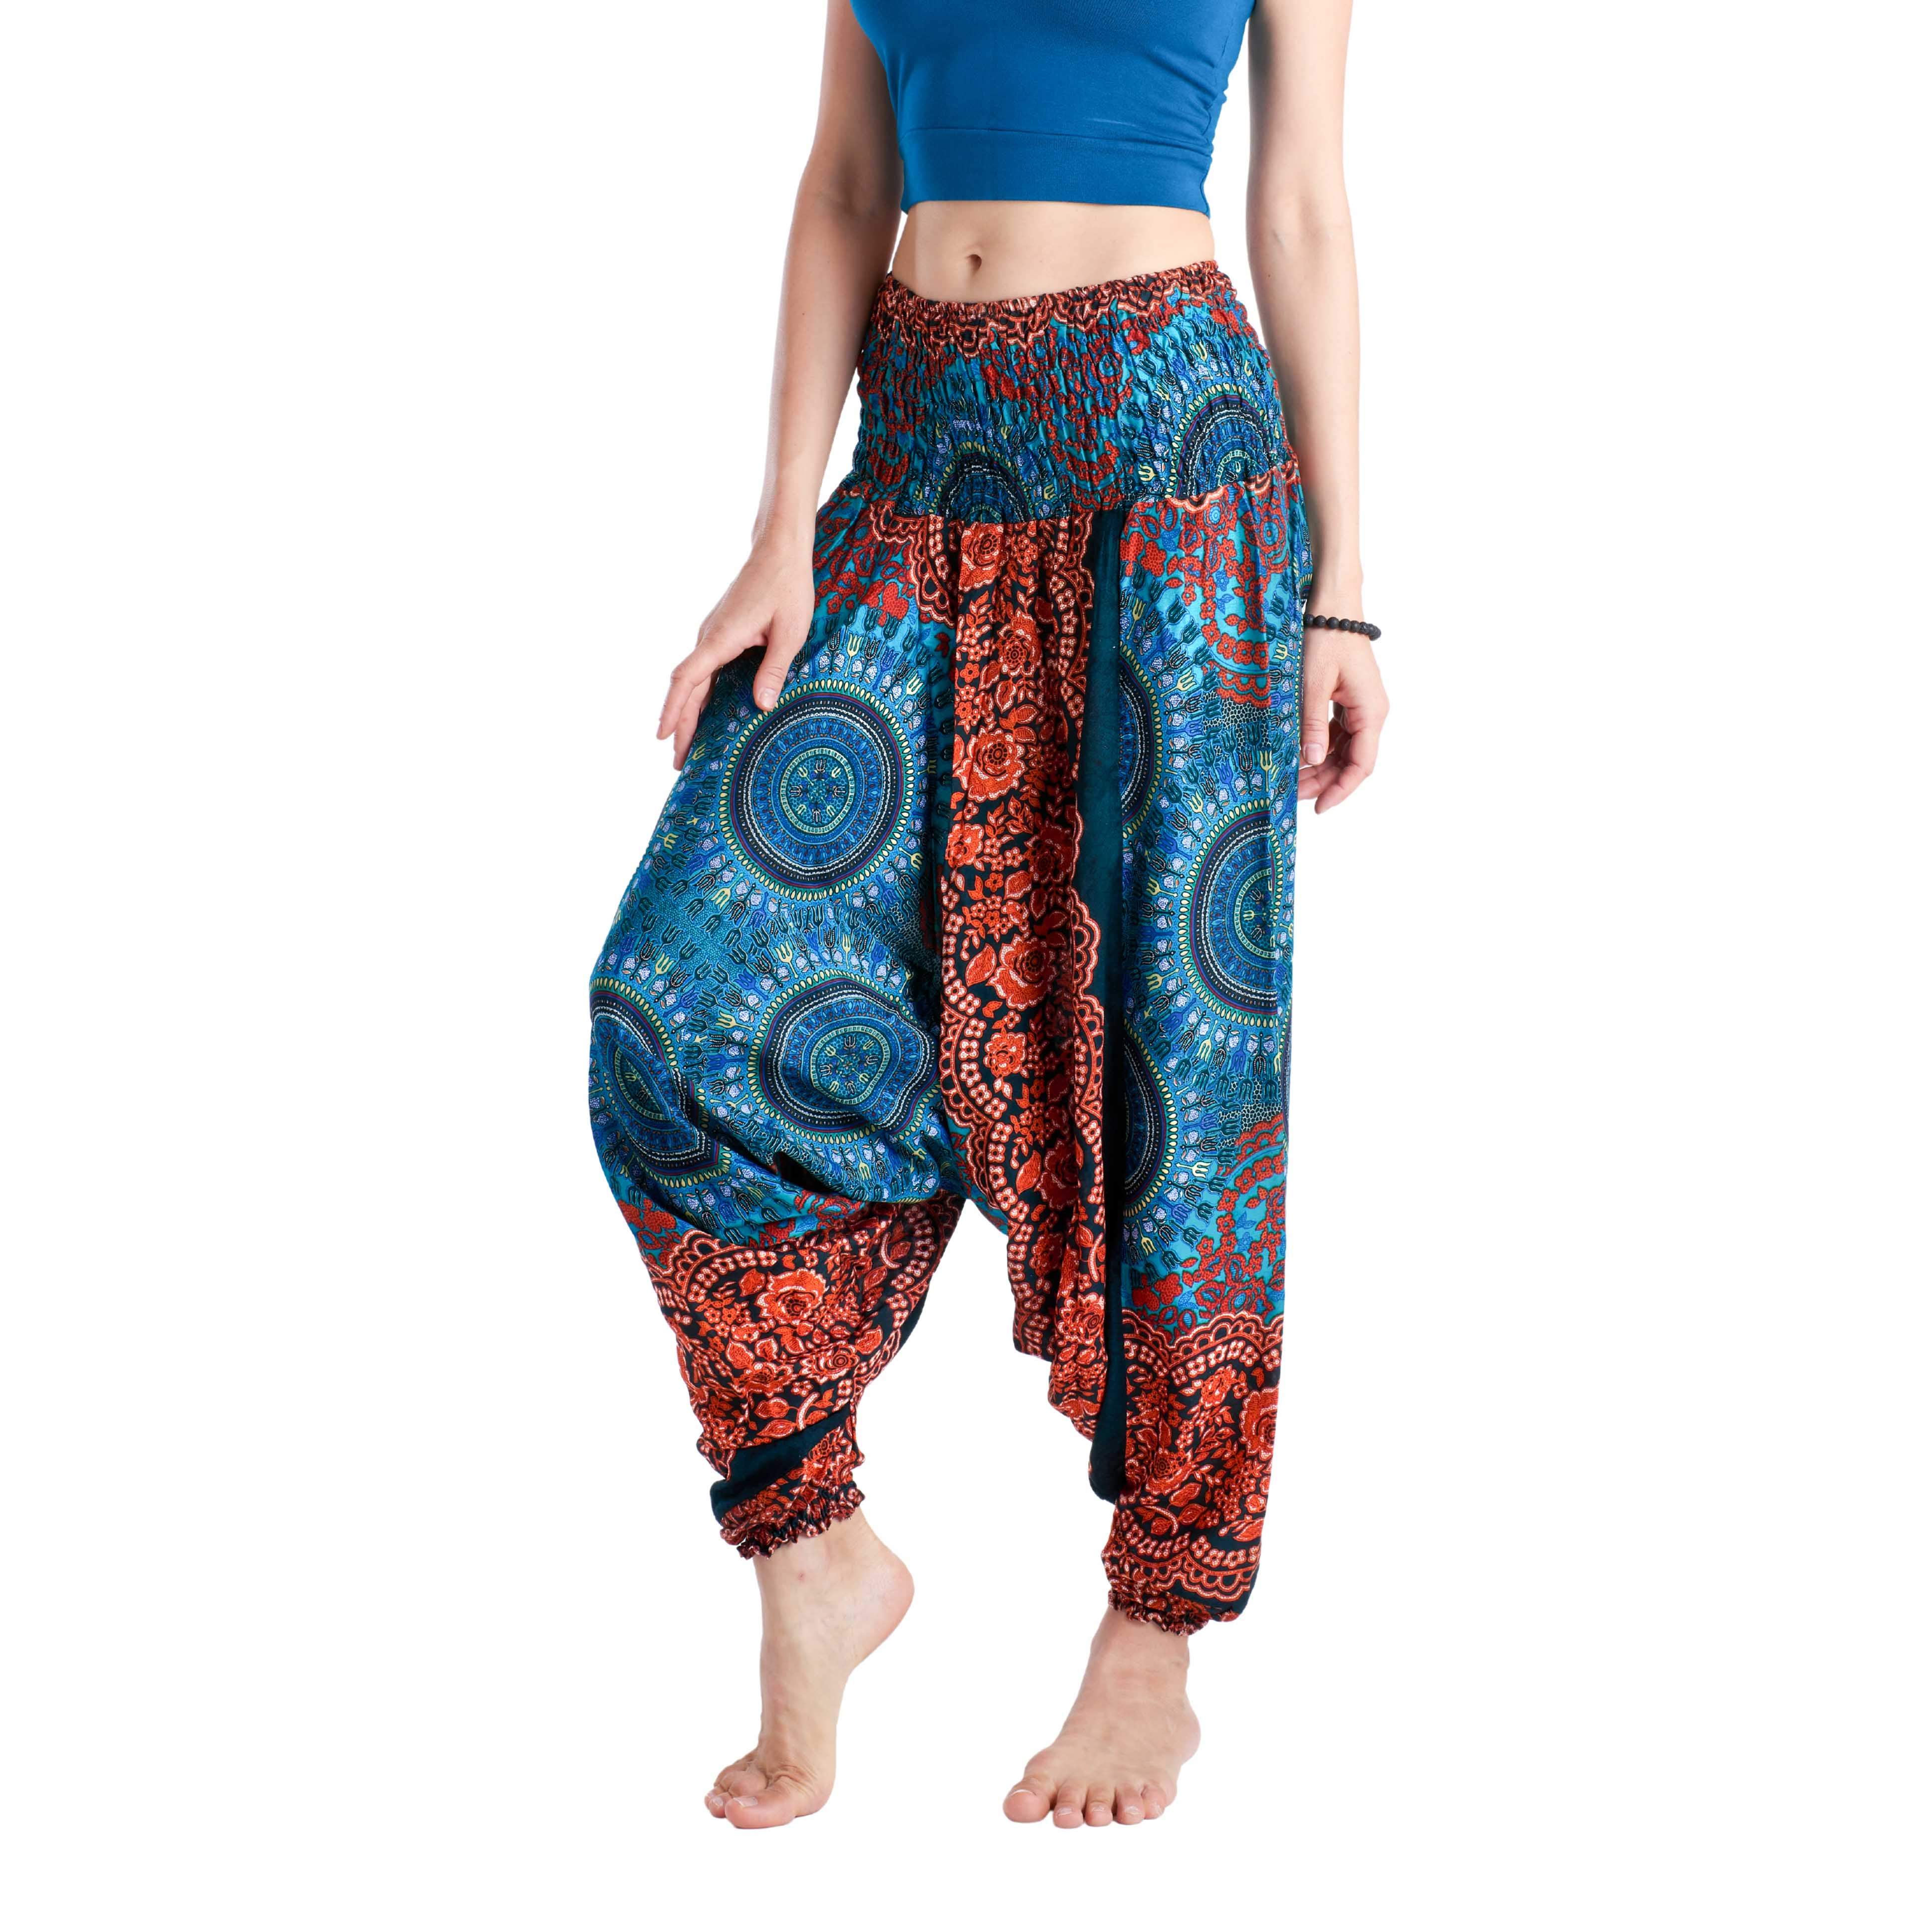 Drawstring - Buy Today Elephant Pants Jewelry And Bohemian Clothes Handmade In Thailand Help To Save The Elephants FairTrade And Vegan